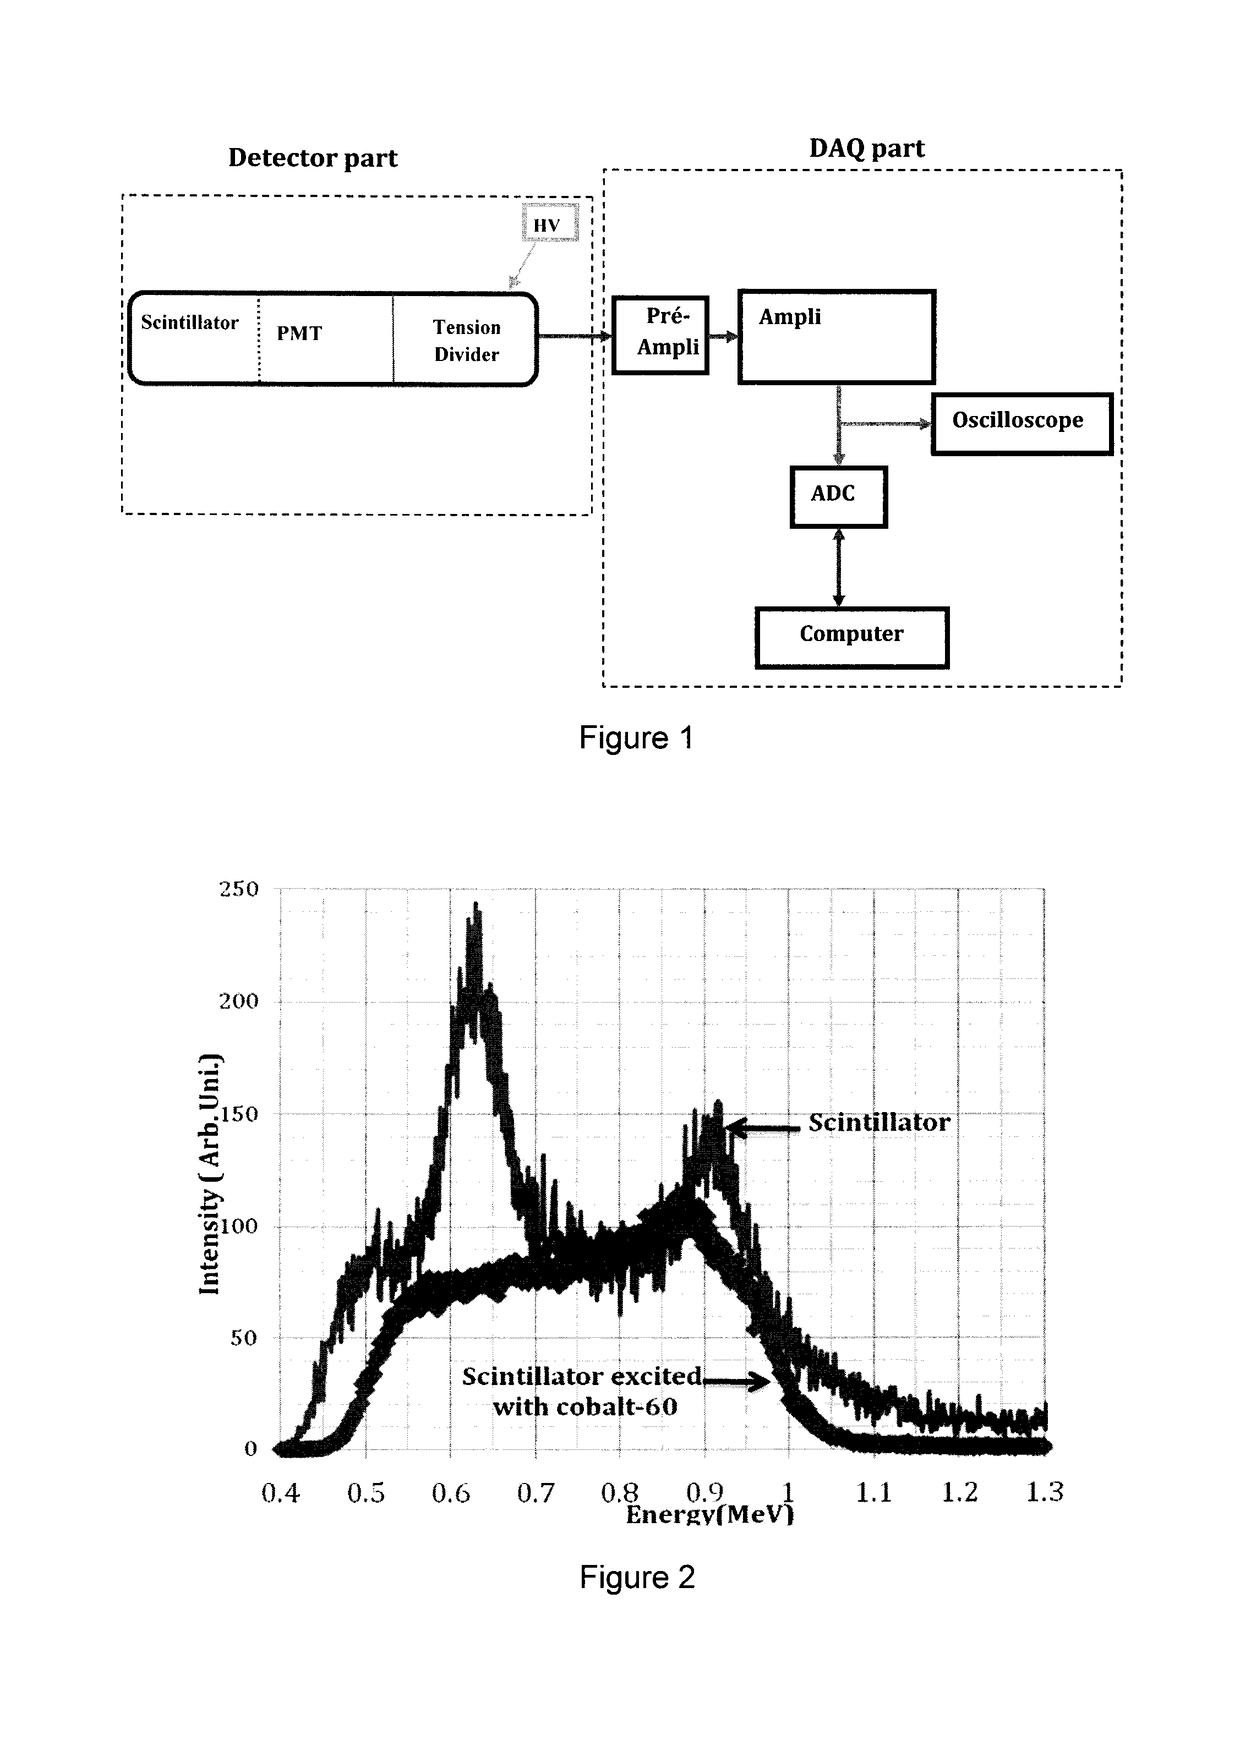 Boron-loaded liquid scintillator compositions and methods of preparation thereof